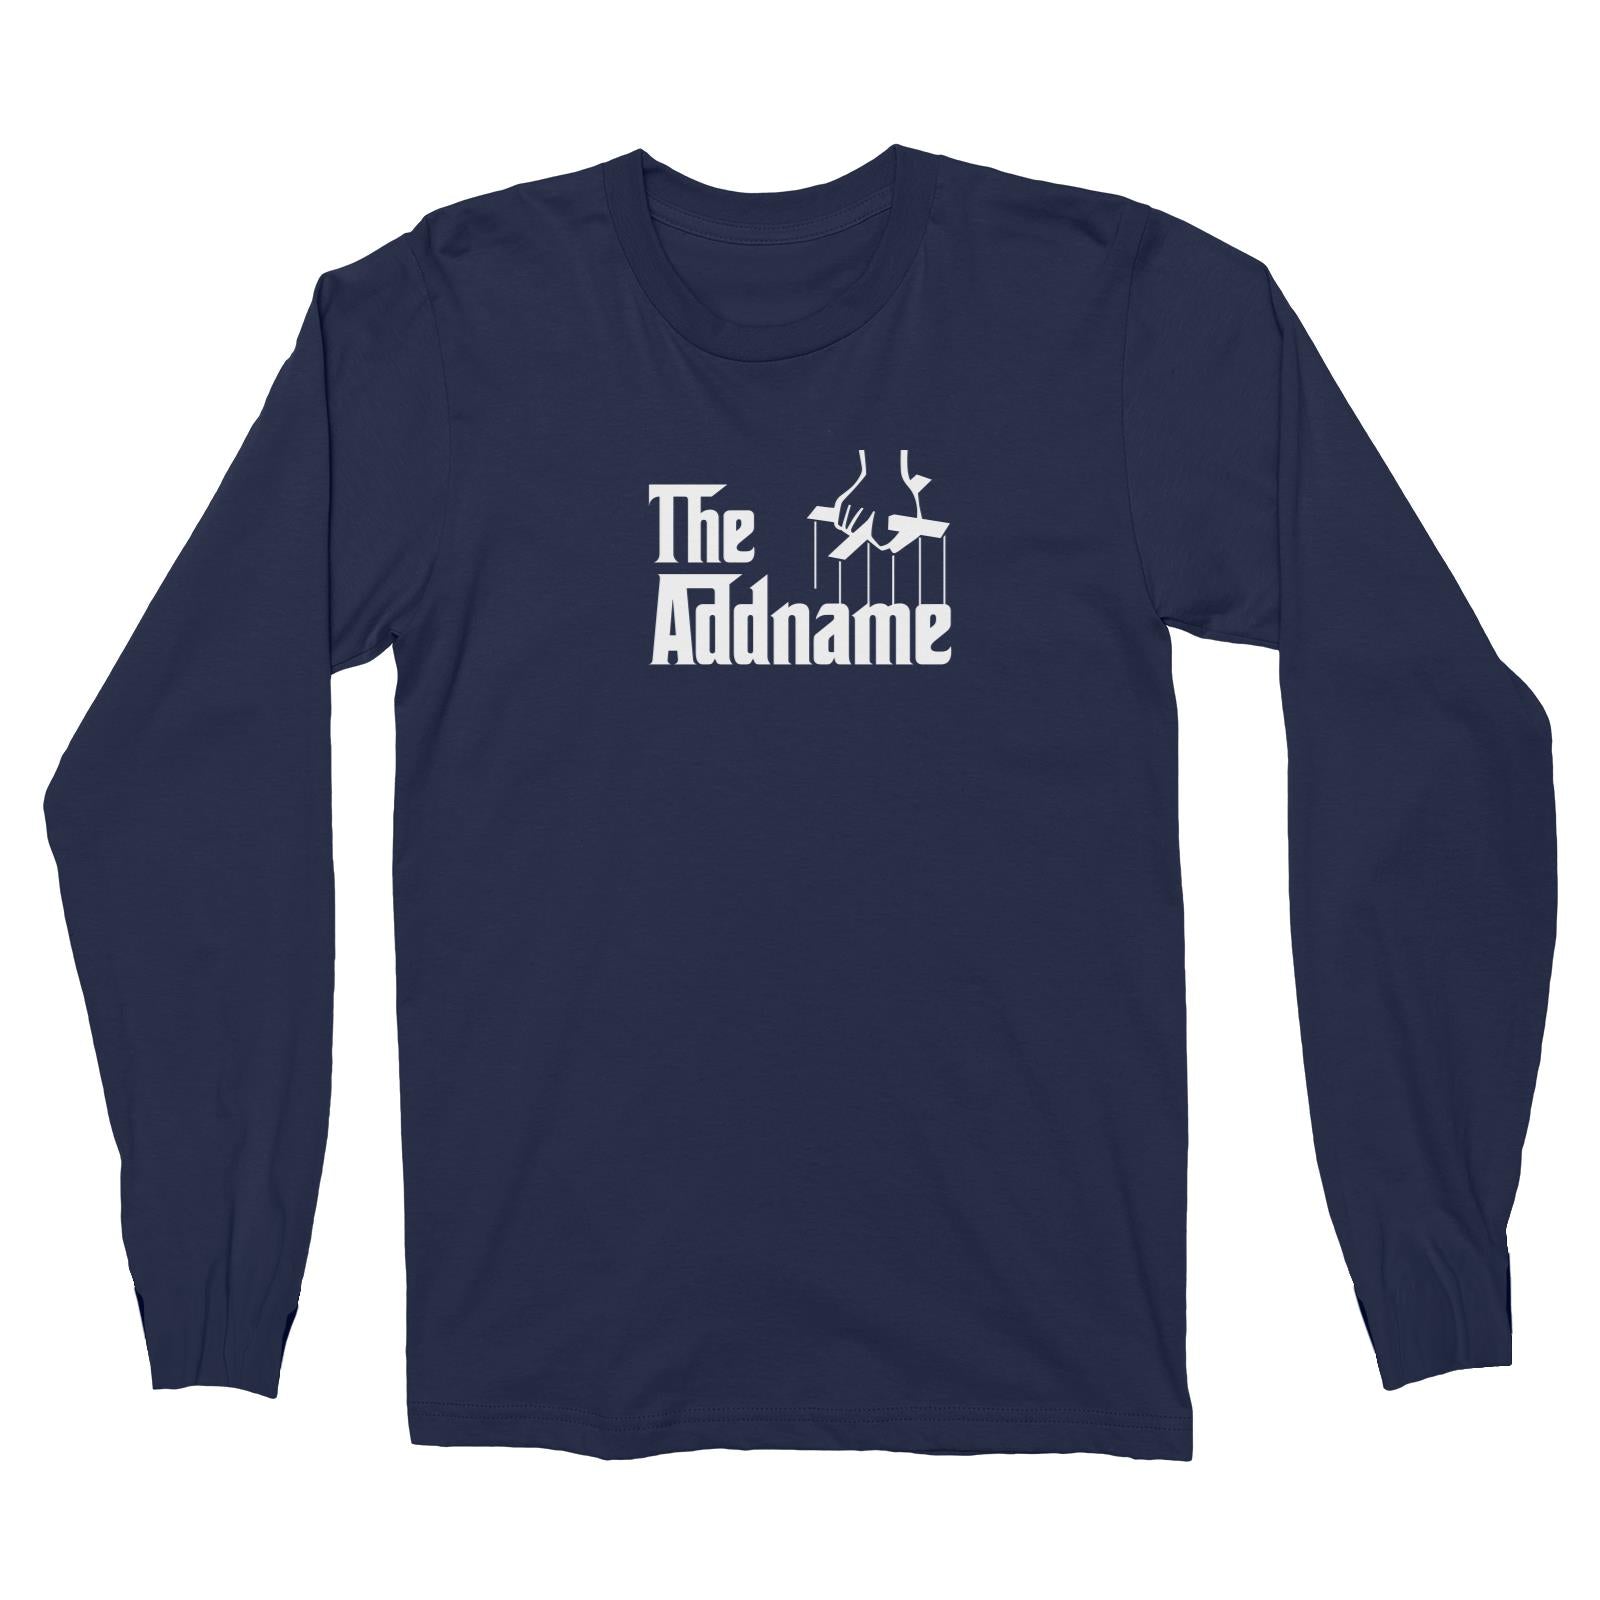 The Addname Long Sleeve Unisex T-Shirt Godfather Matching Family Personalizable Designs